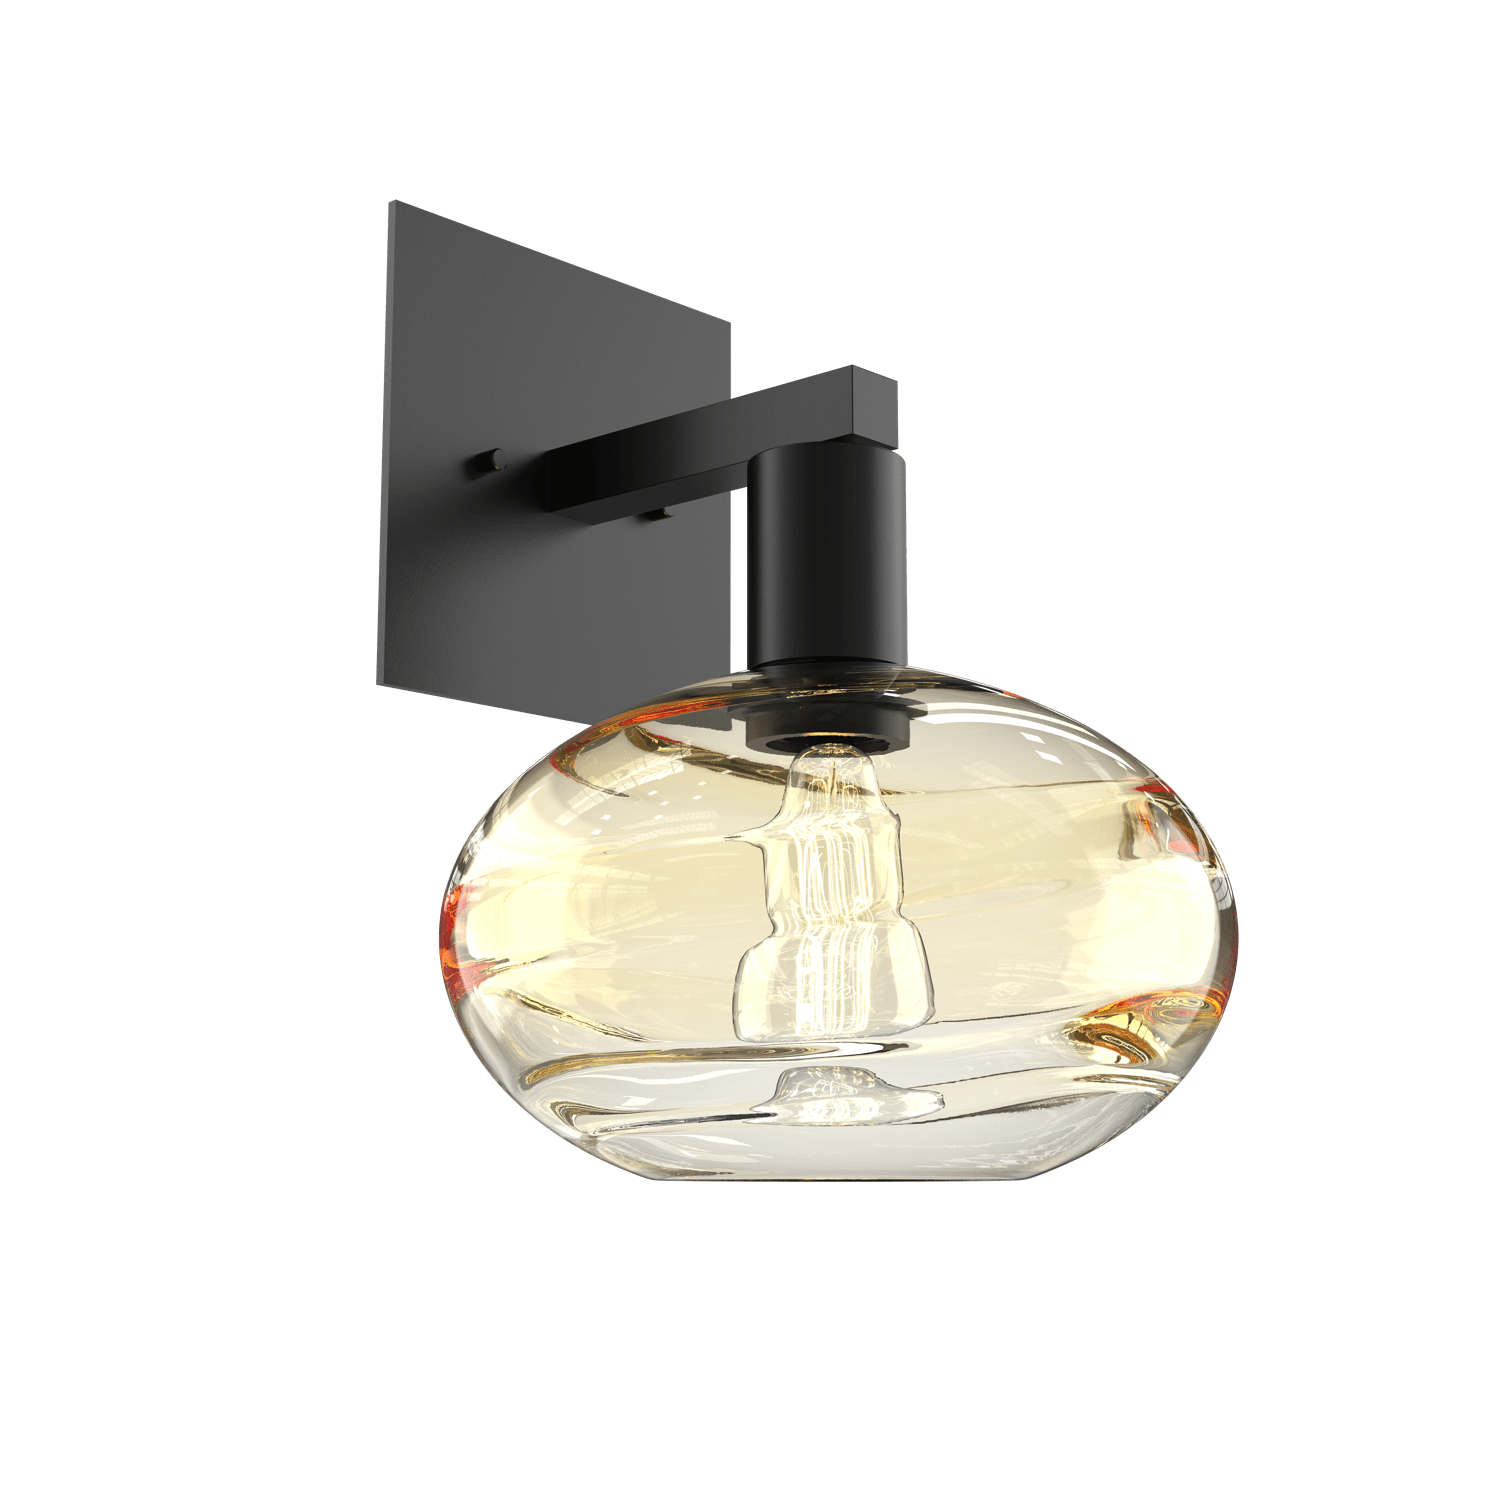 IDB0036-11-MB-OA-Hammerton-Studio-Optic-Blown-Glass-Coppa-wall-sconce-with-matte-black-finish-and-optic-amber-blown-glass-shades-and-incandescent-lamping